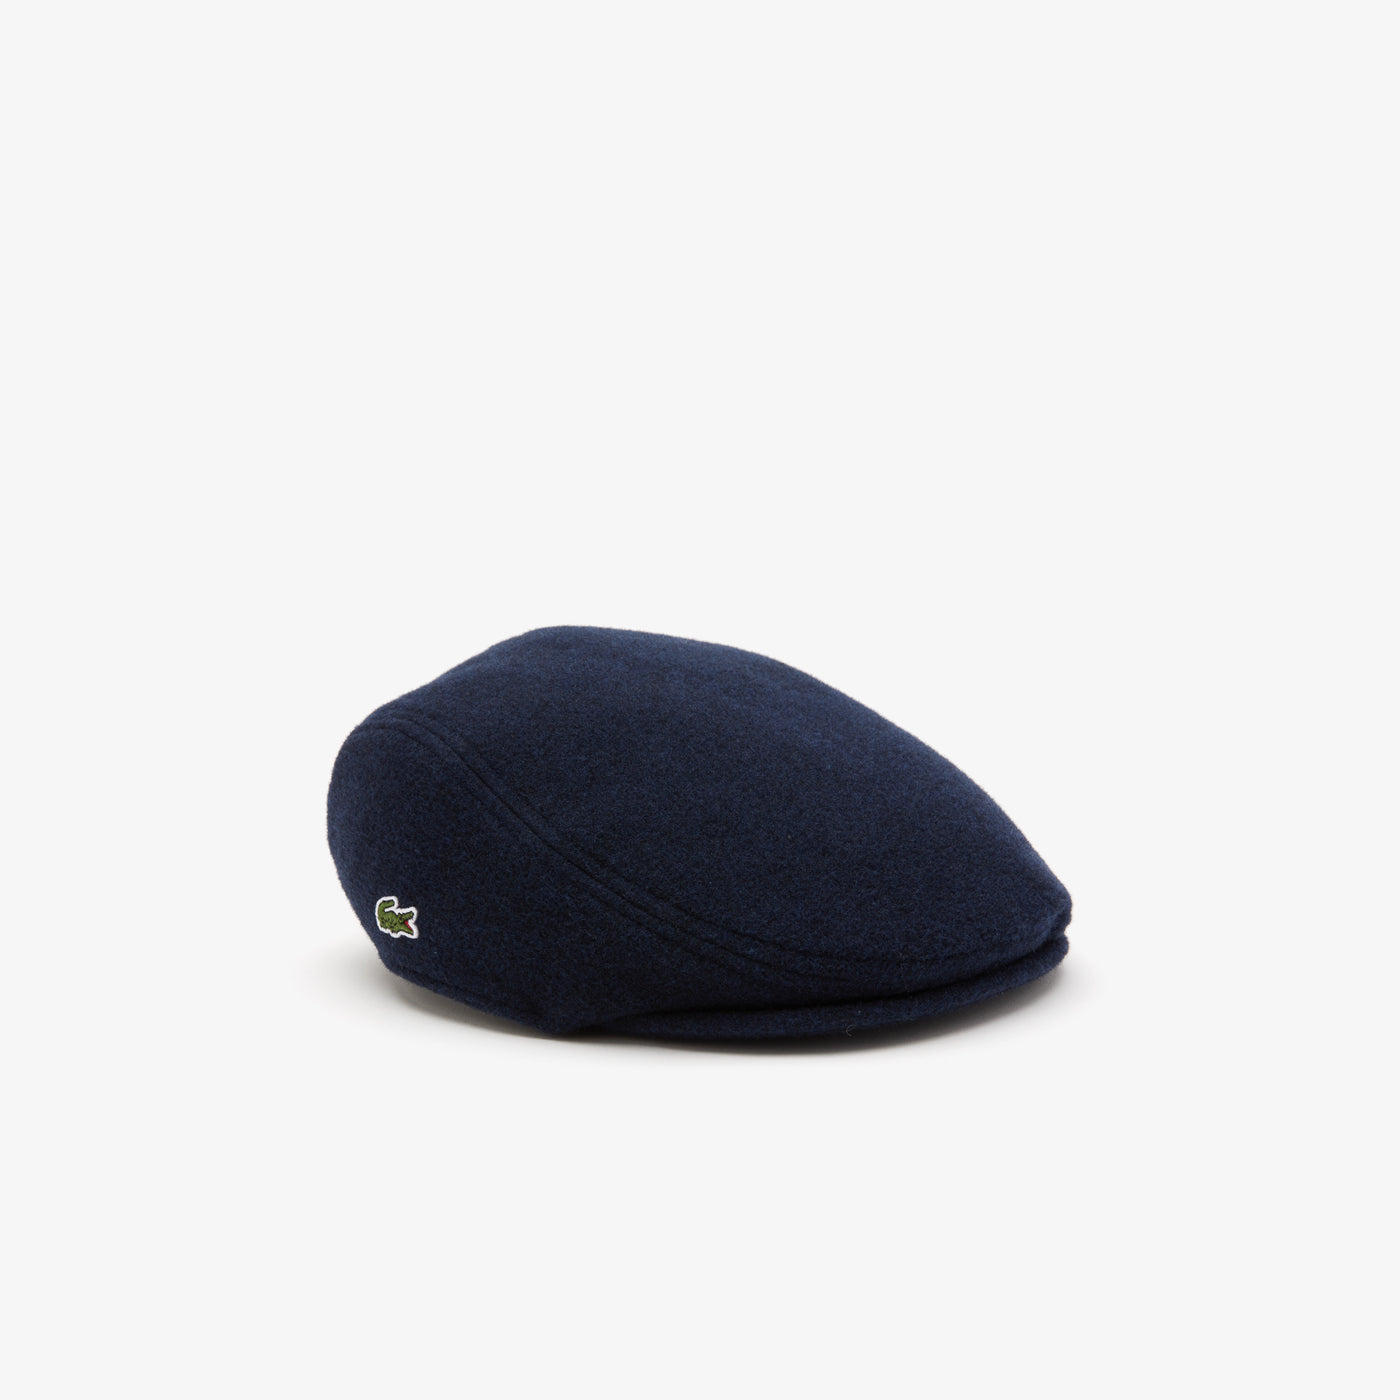 Shop The Latest Collection Of Lacoste Unisex Lacoste Wool Felt Blend Beret - Rk0372 In Lebanon